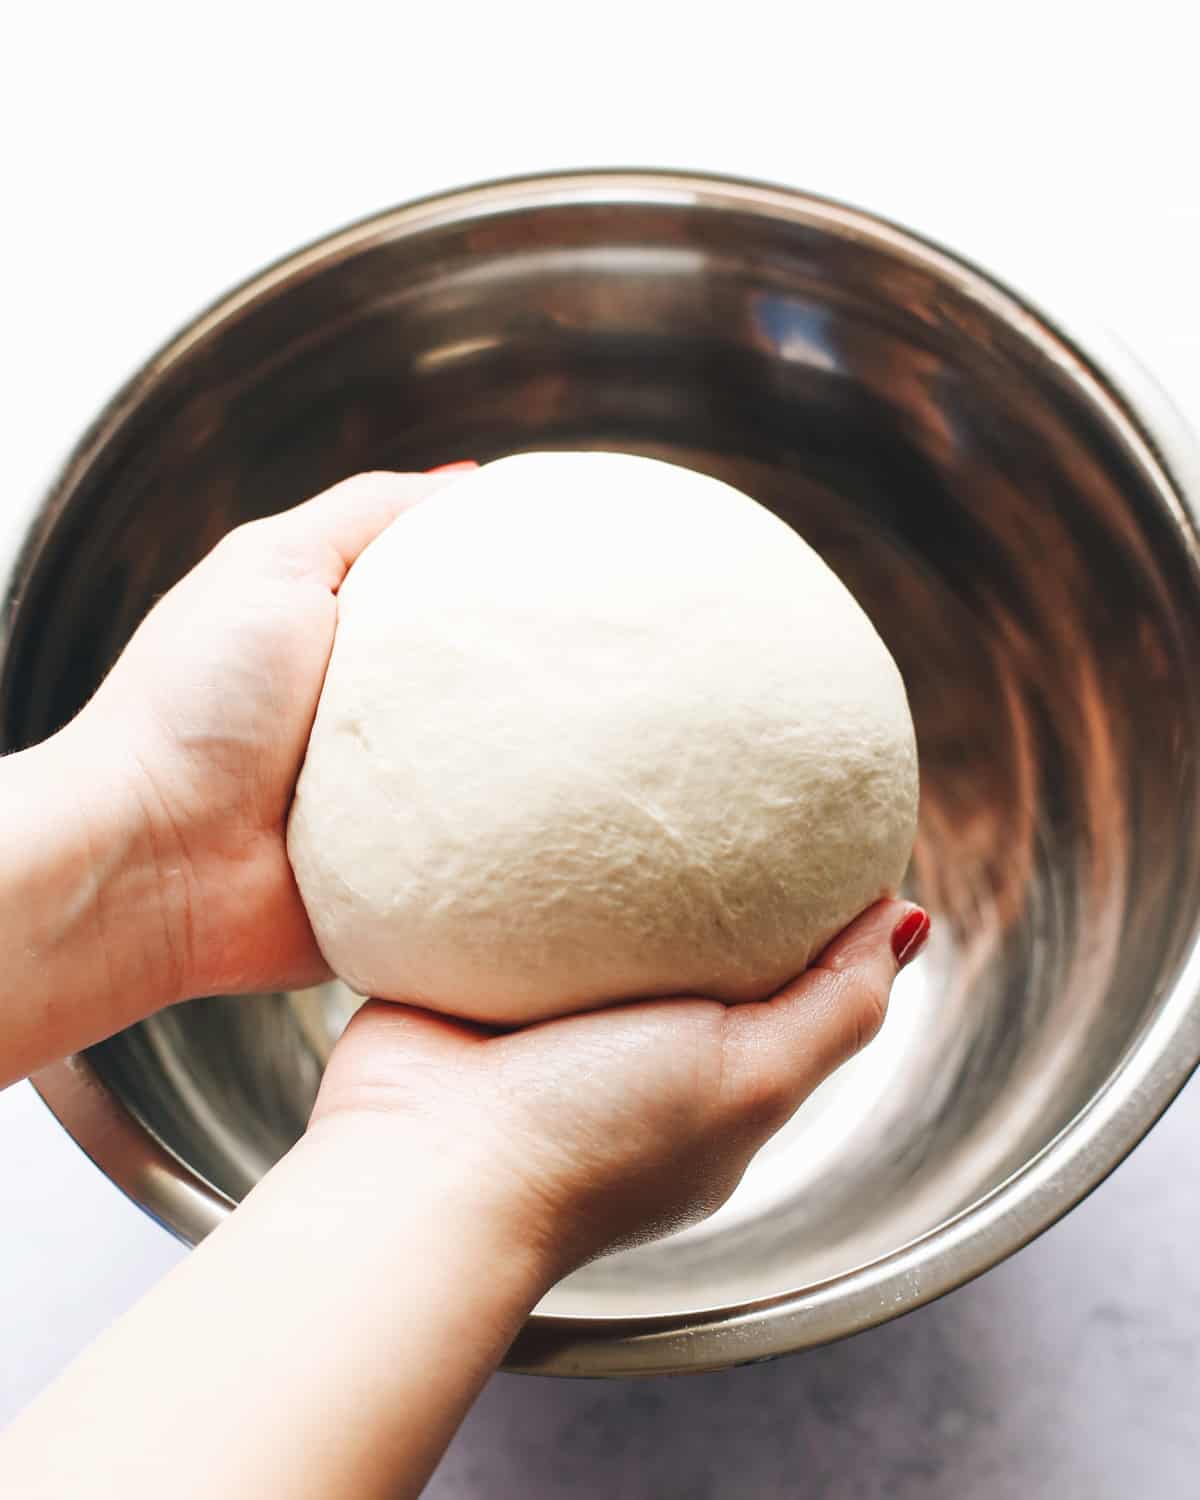 How to Make French Bread - hands holding dough over a bowl